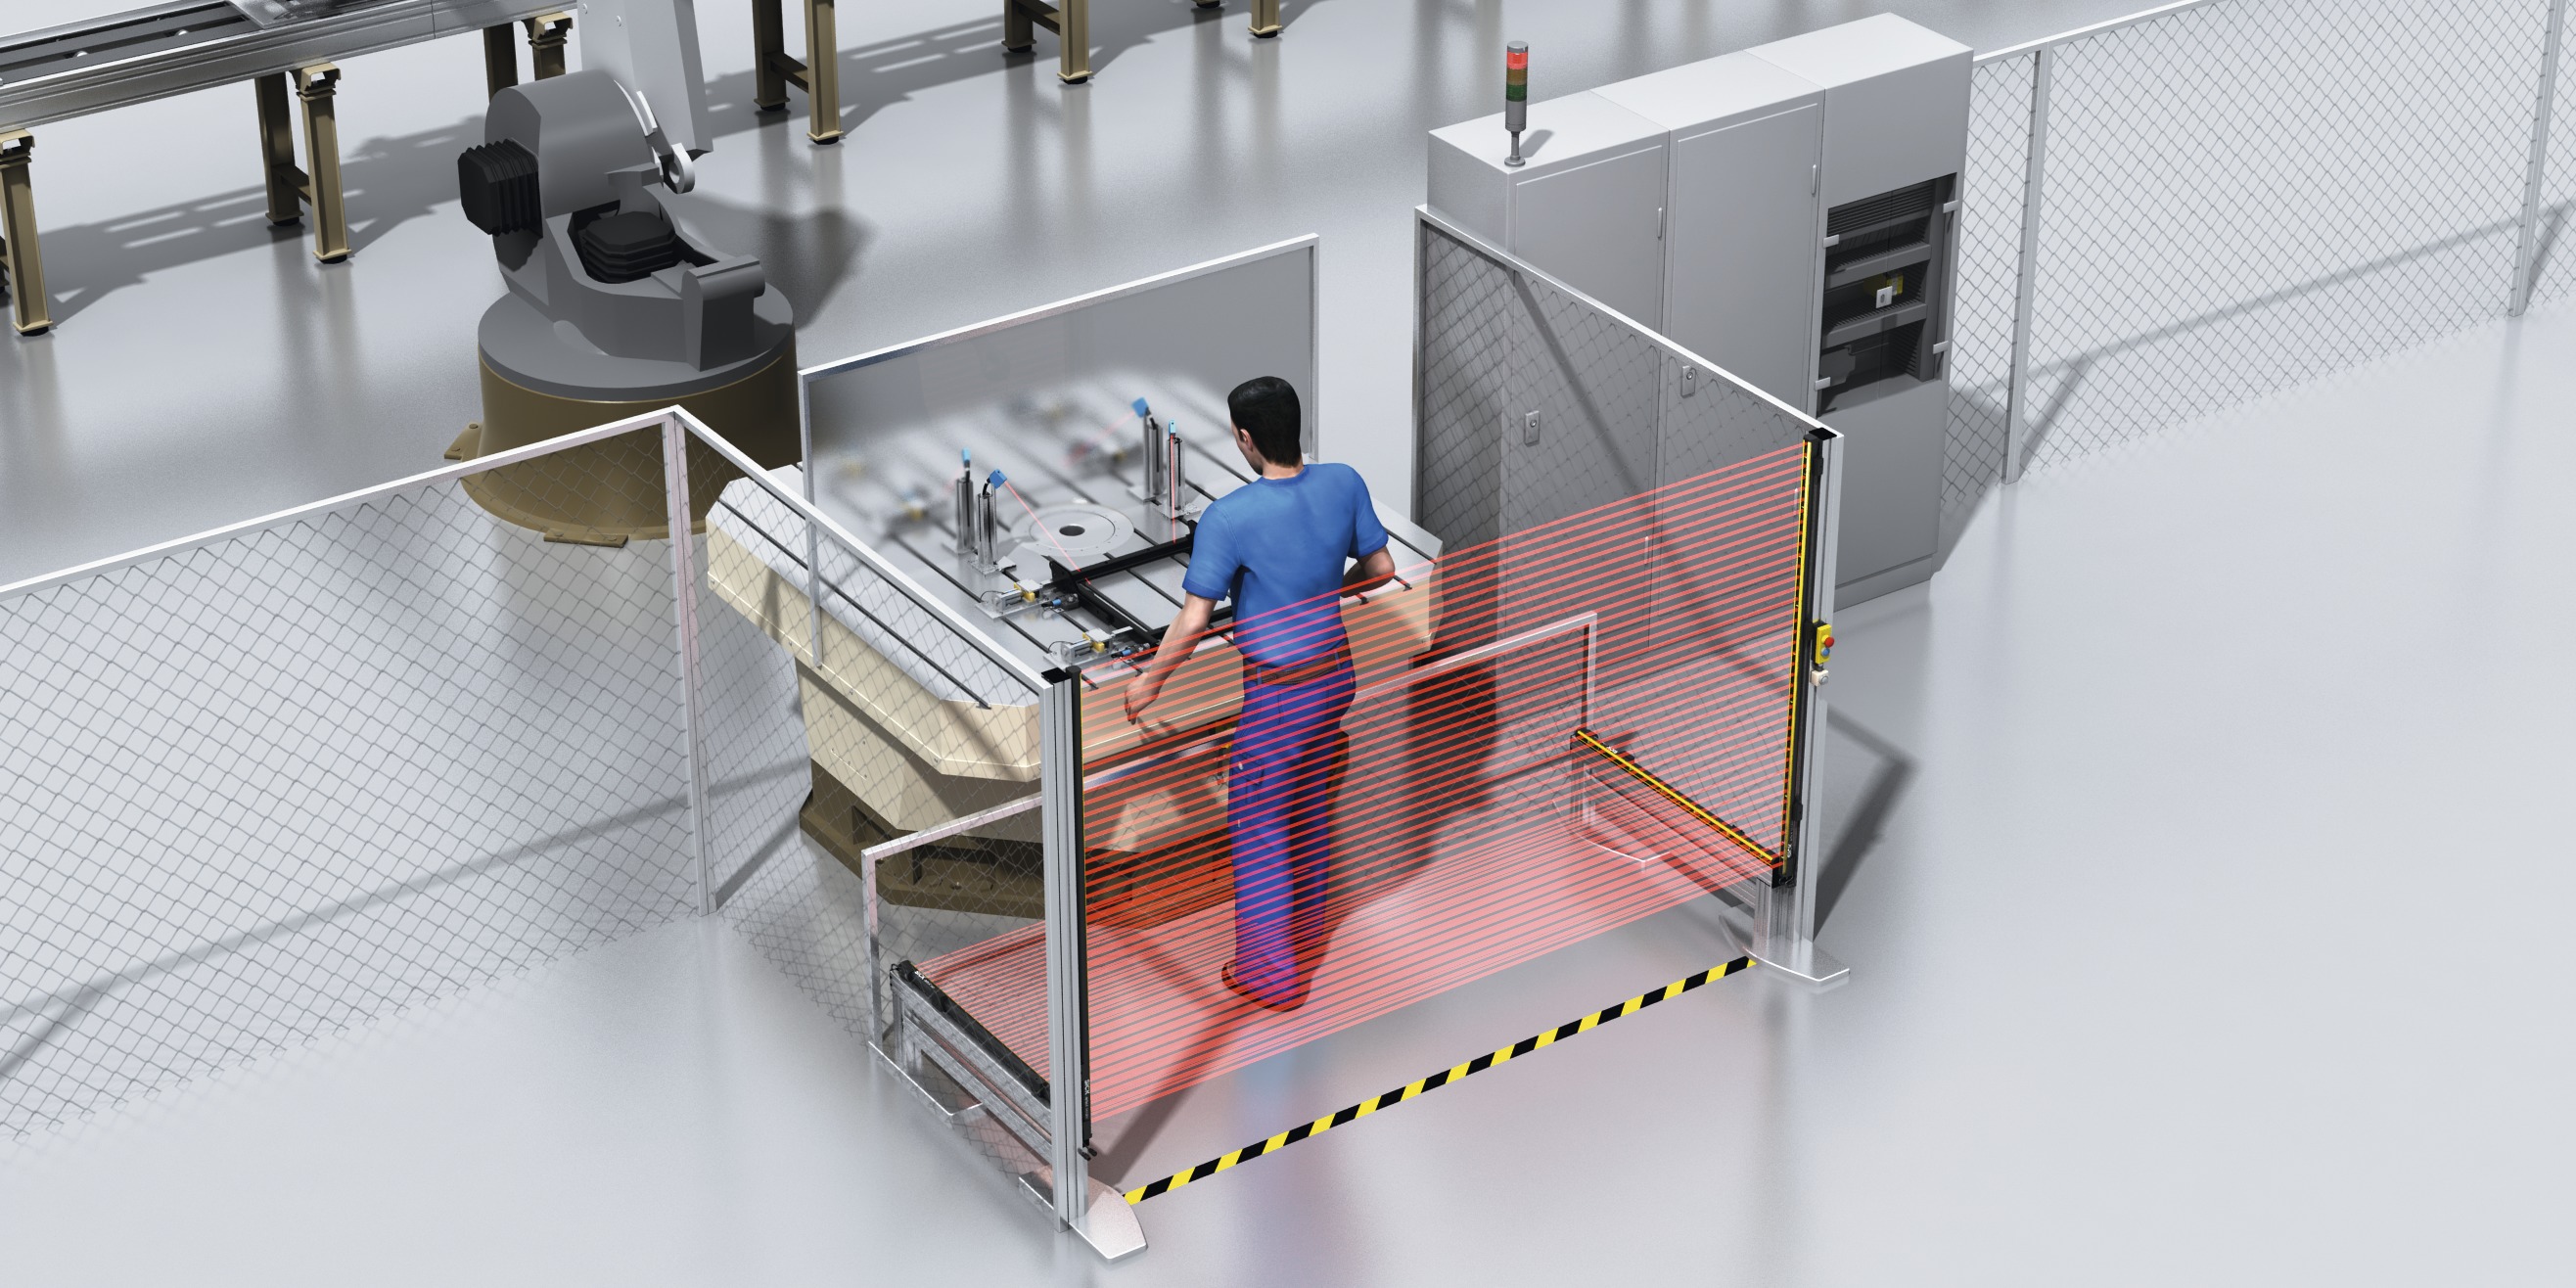 automotive machine safety, Machine Safety in Automotive Production with deTec4